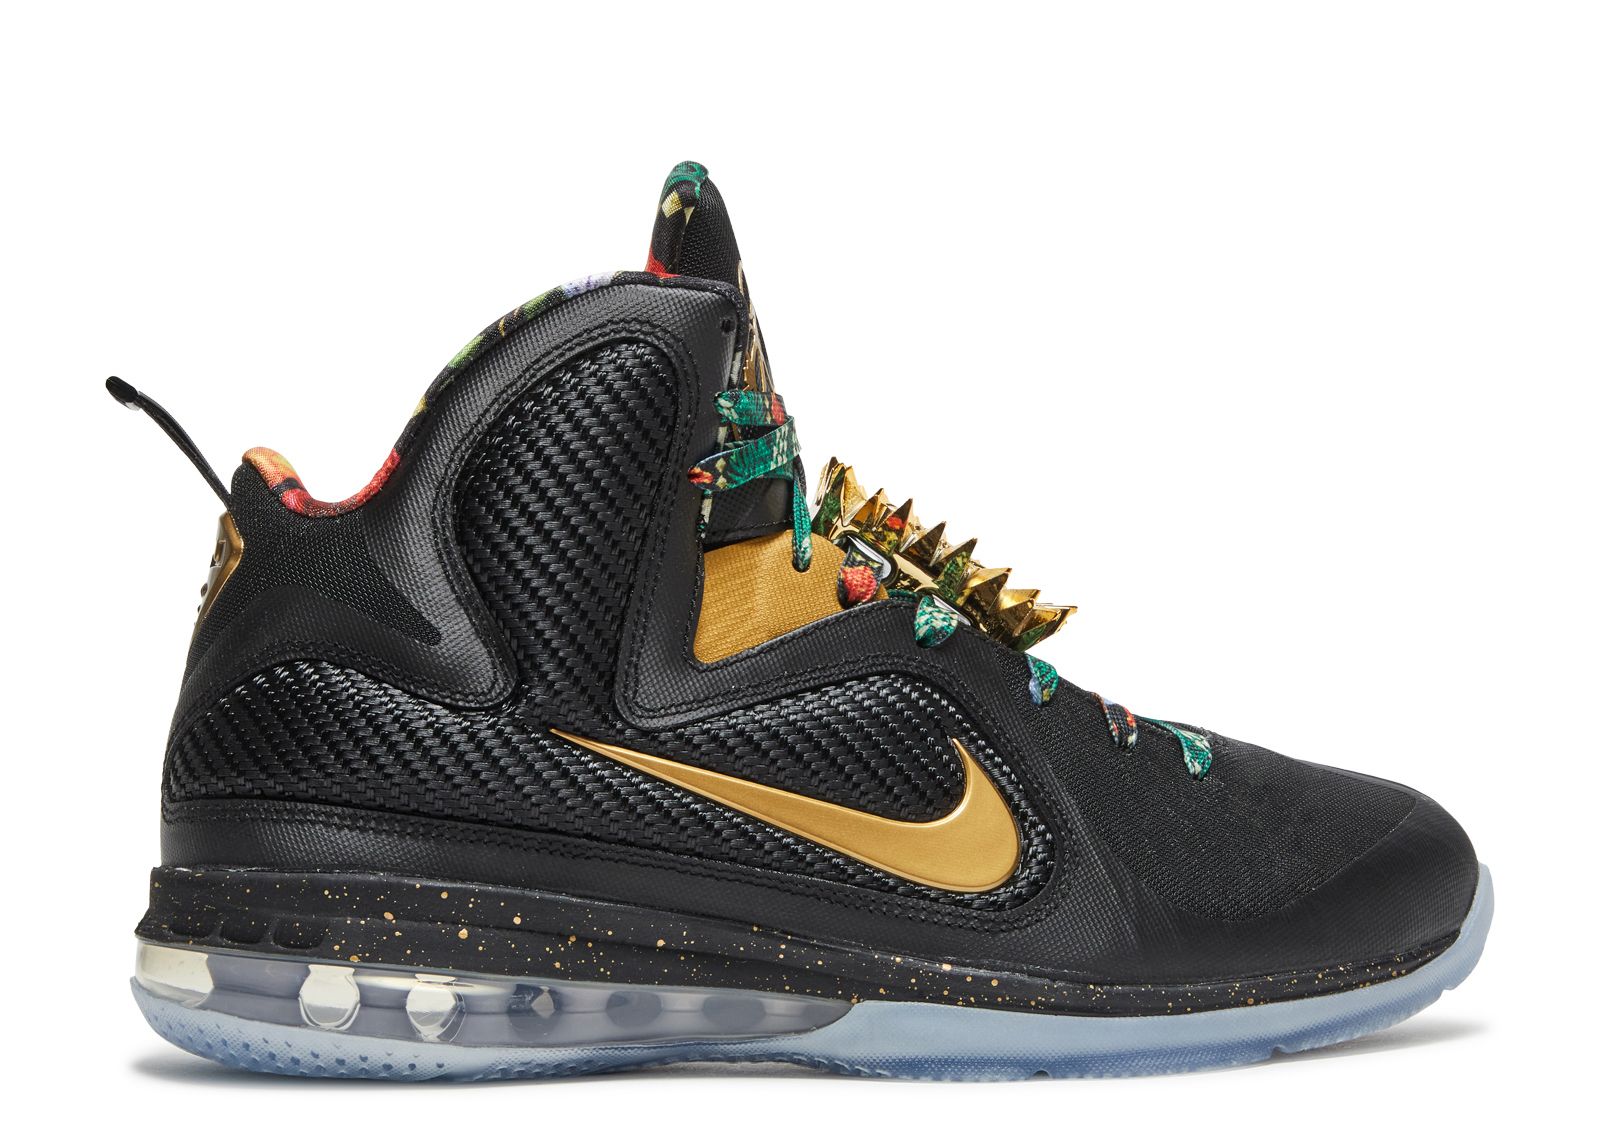 Discover more than 160 lebron james 8 shoes best